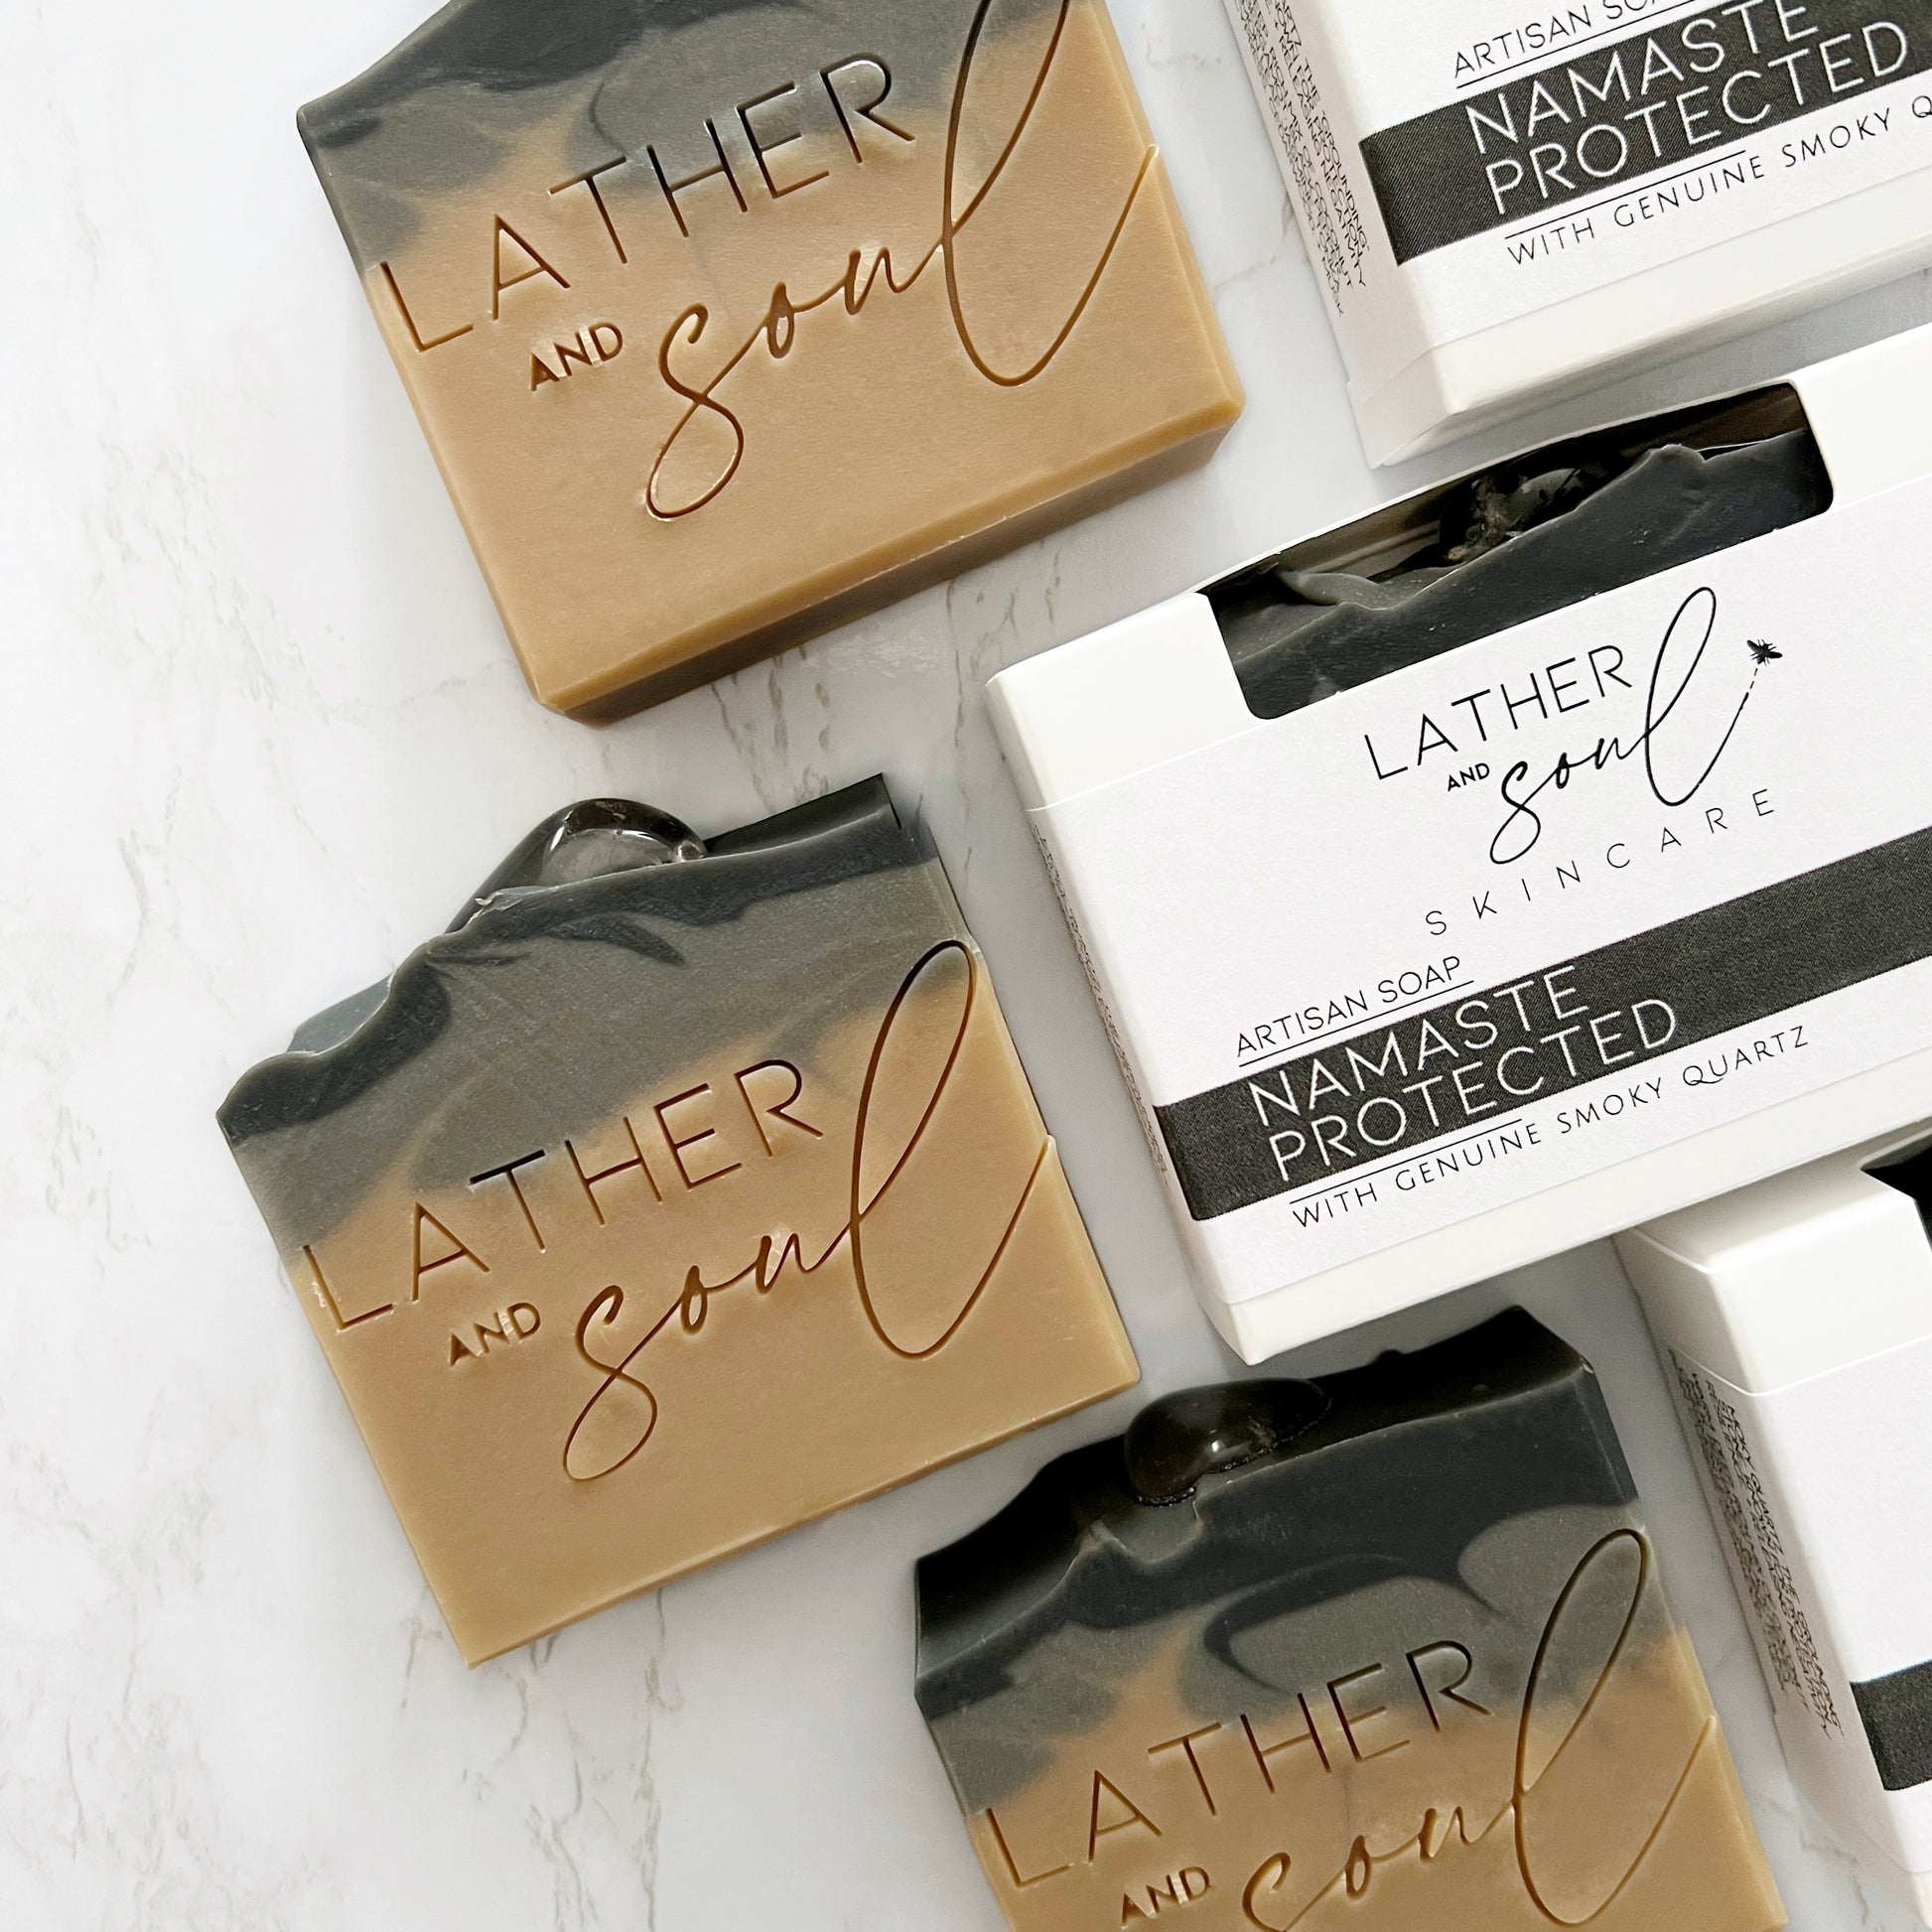 Smoky quartz crystal soaps made by Lather and Soul Skincare